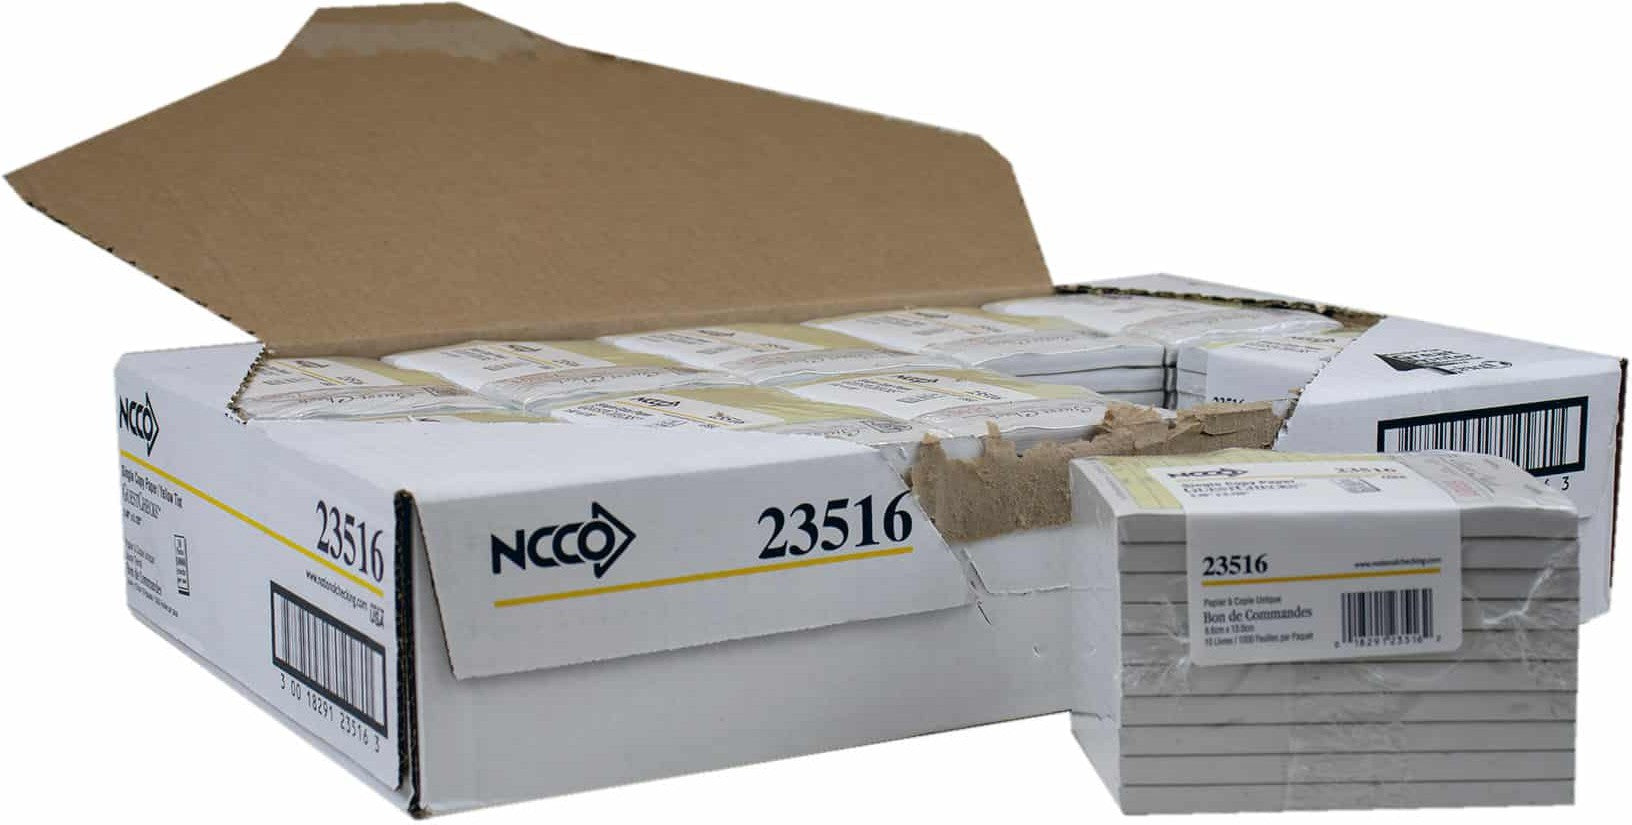 NCCO International - 3.5" x 5.125", 2-Part Small Paper Guest Check, 1000/Pk - 23516